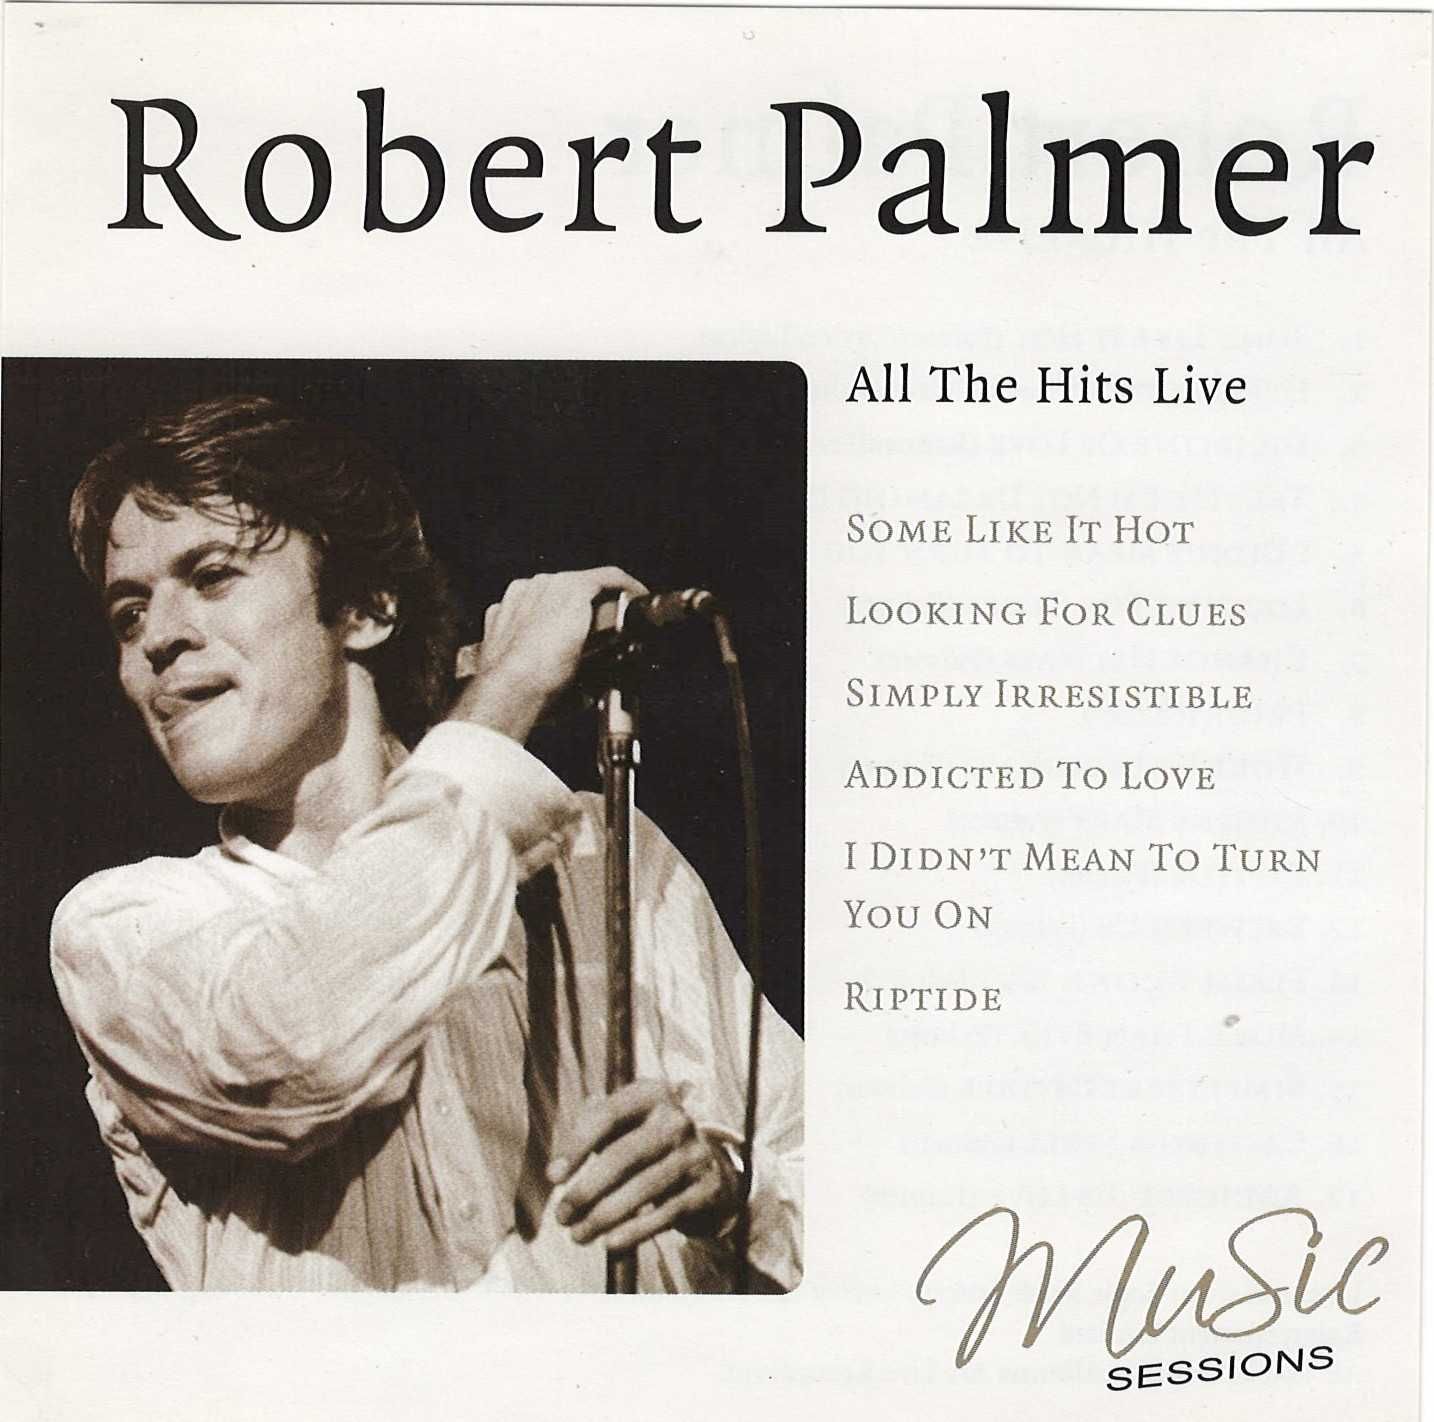 ROBERT PALMER – All the Hits Live